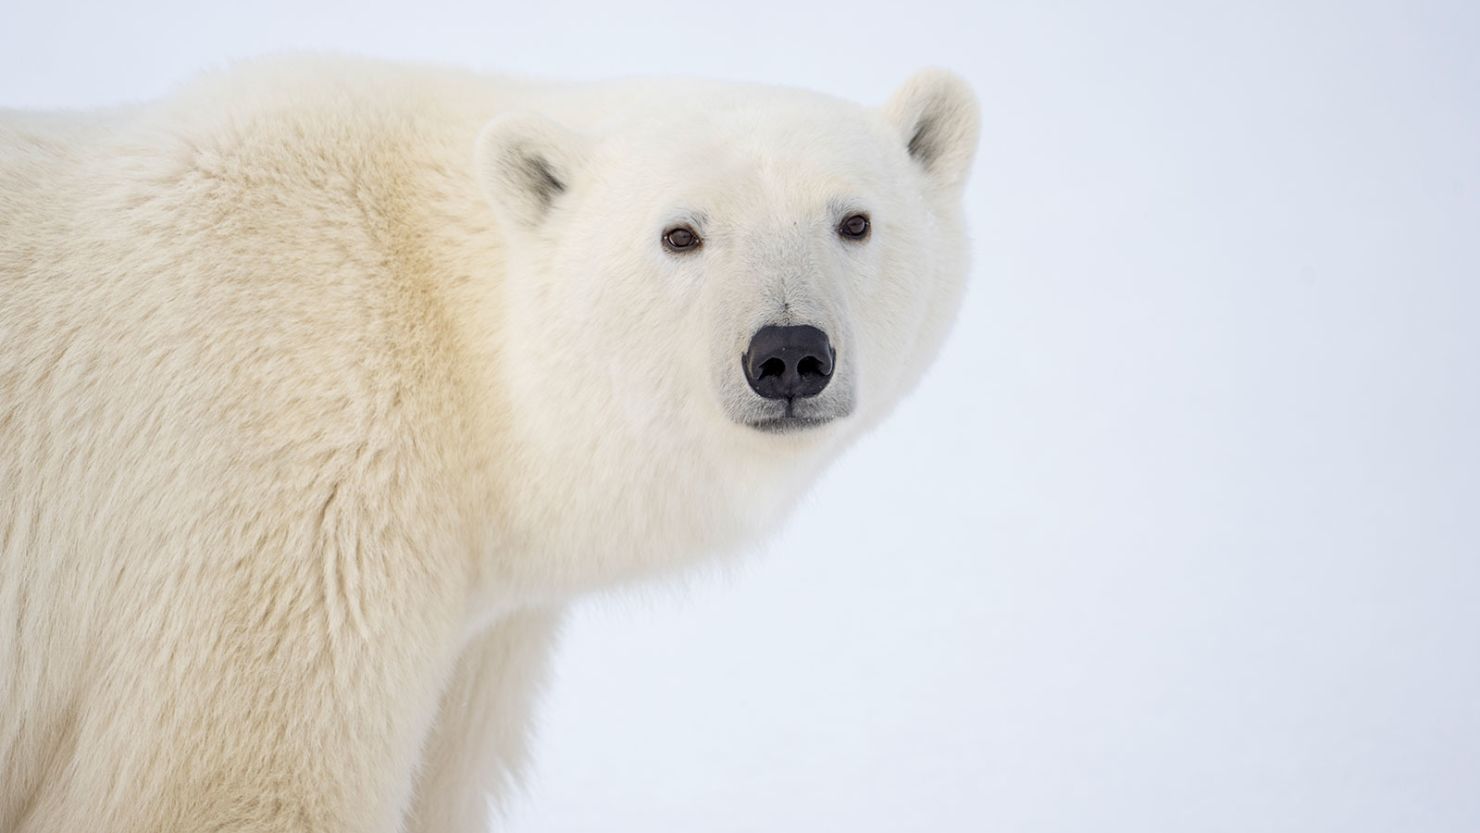 Polar bears and climate change: What does the science say?